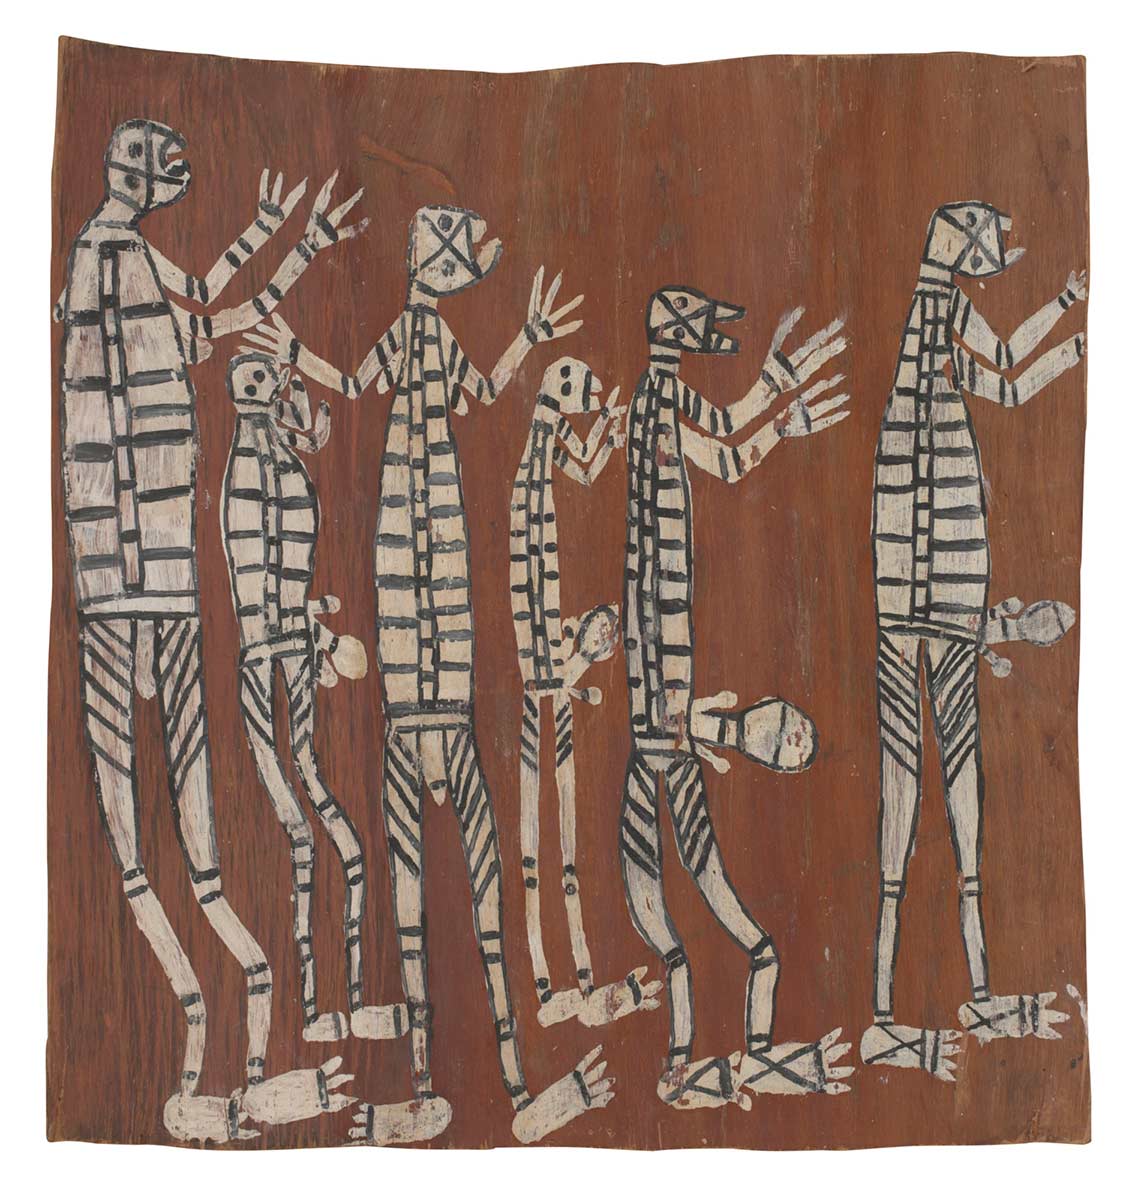 A bark painting worked with ochres on bark. It depicts six Mimi figures  two larger females and four smaller males, all with raised hands walking to the same direction. Each figure is painted in white with parallel lines and outlines of black. The painting has a red background. - click to view larger image